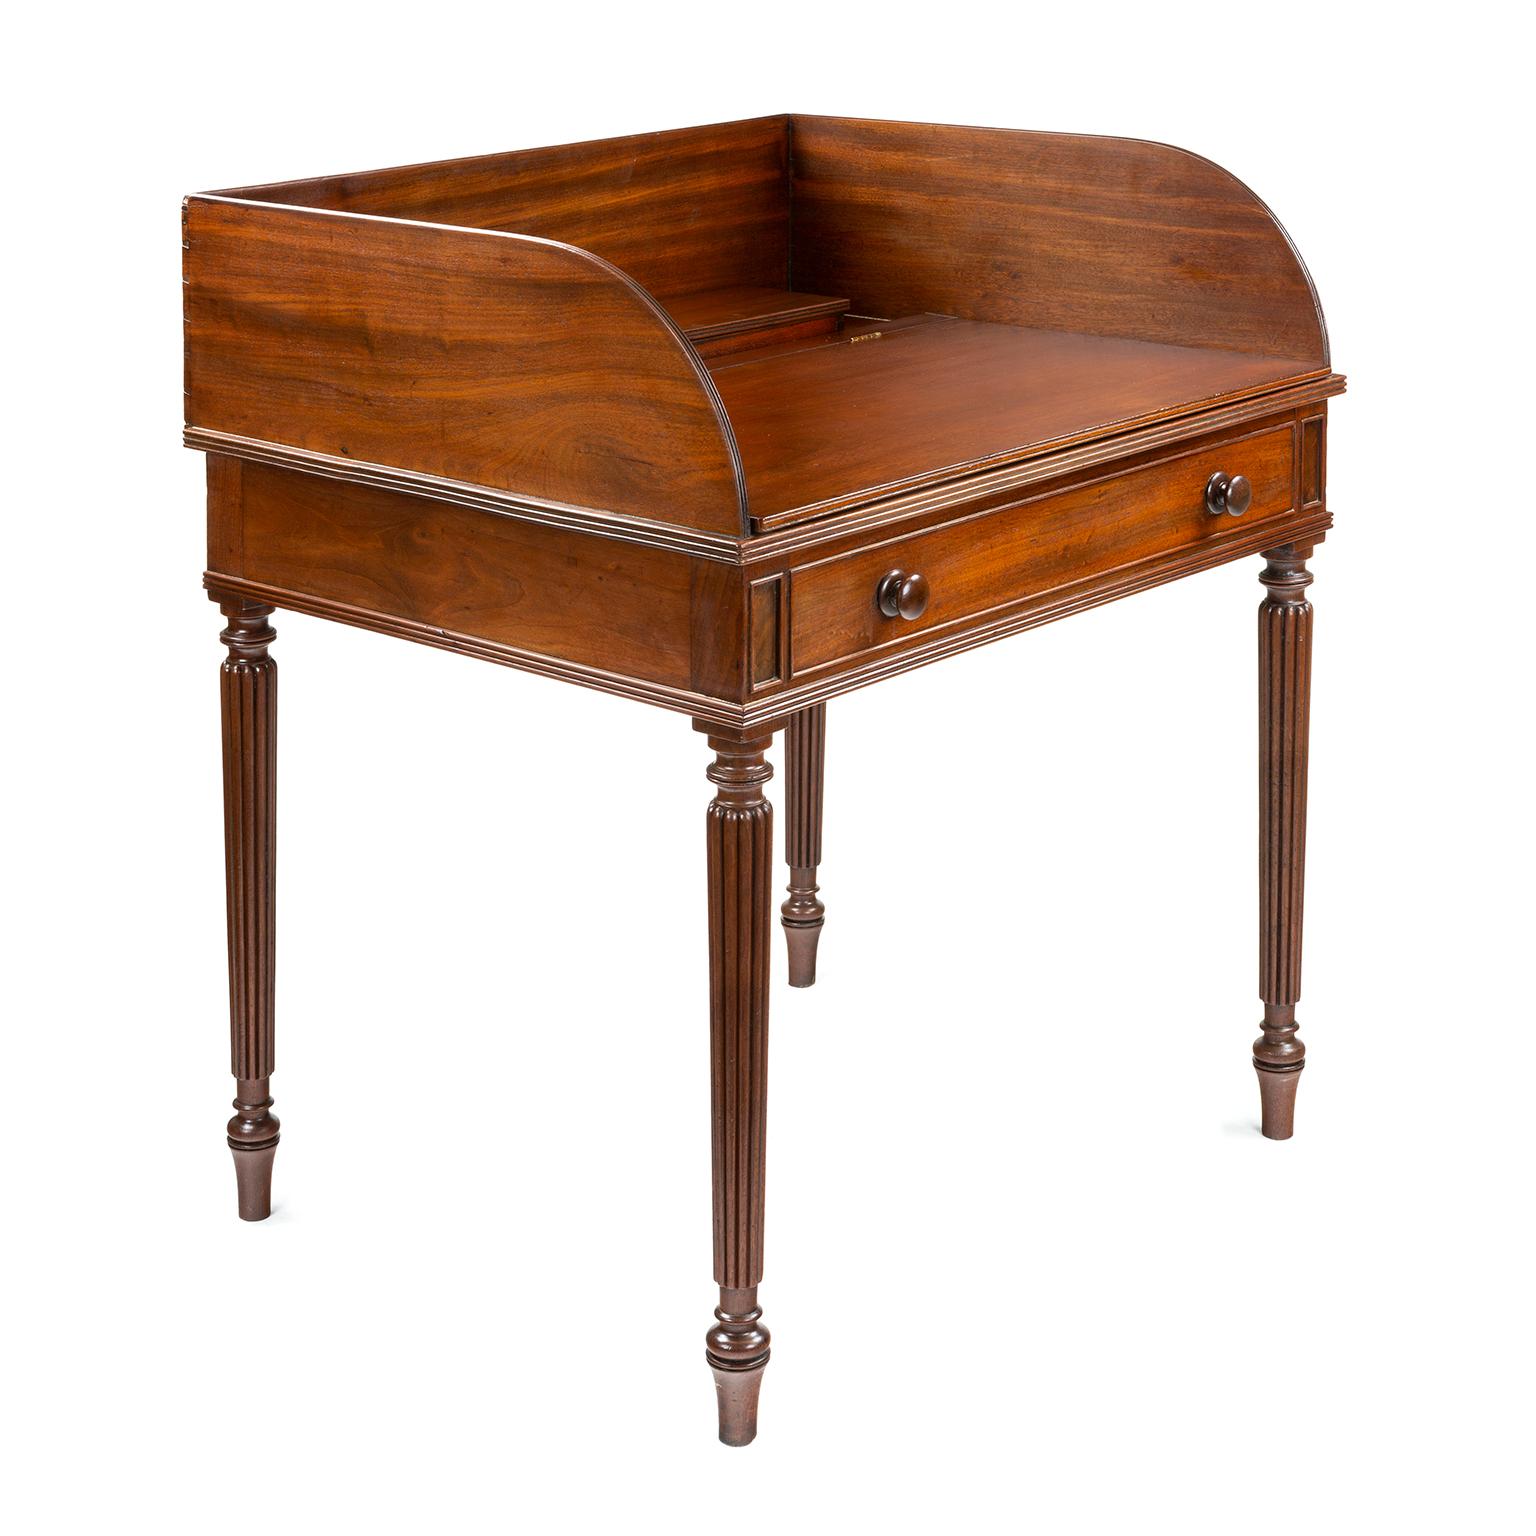 Regency Gillows wash stand / writing table in Mahogany 1